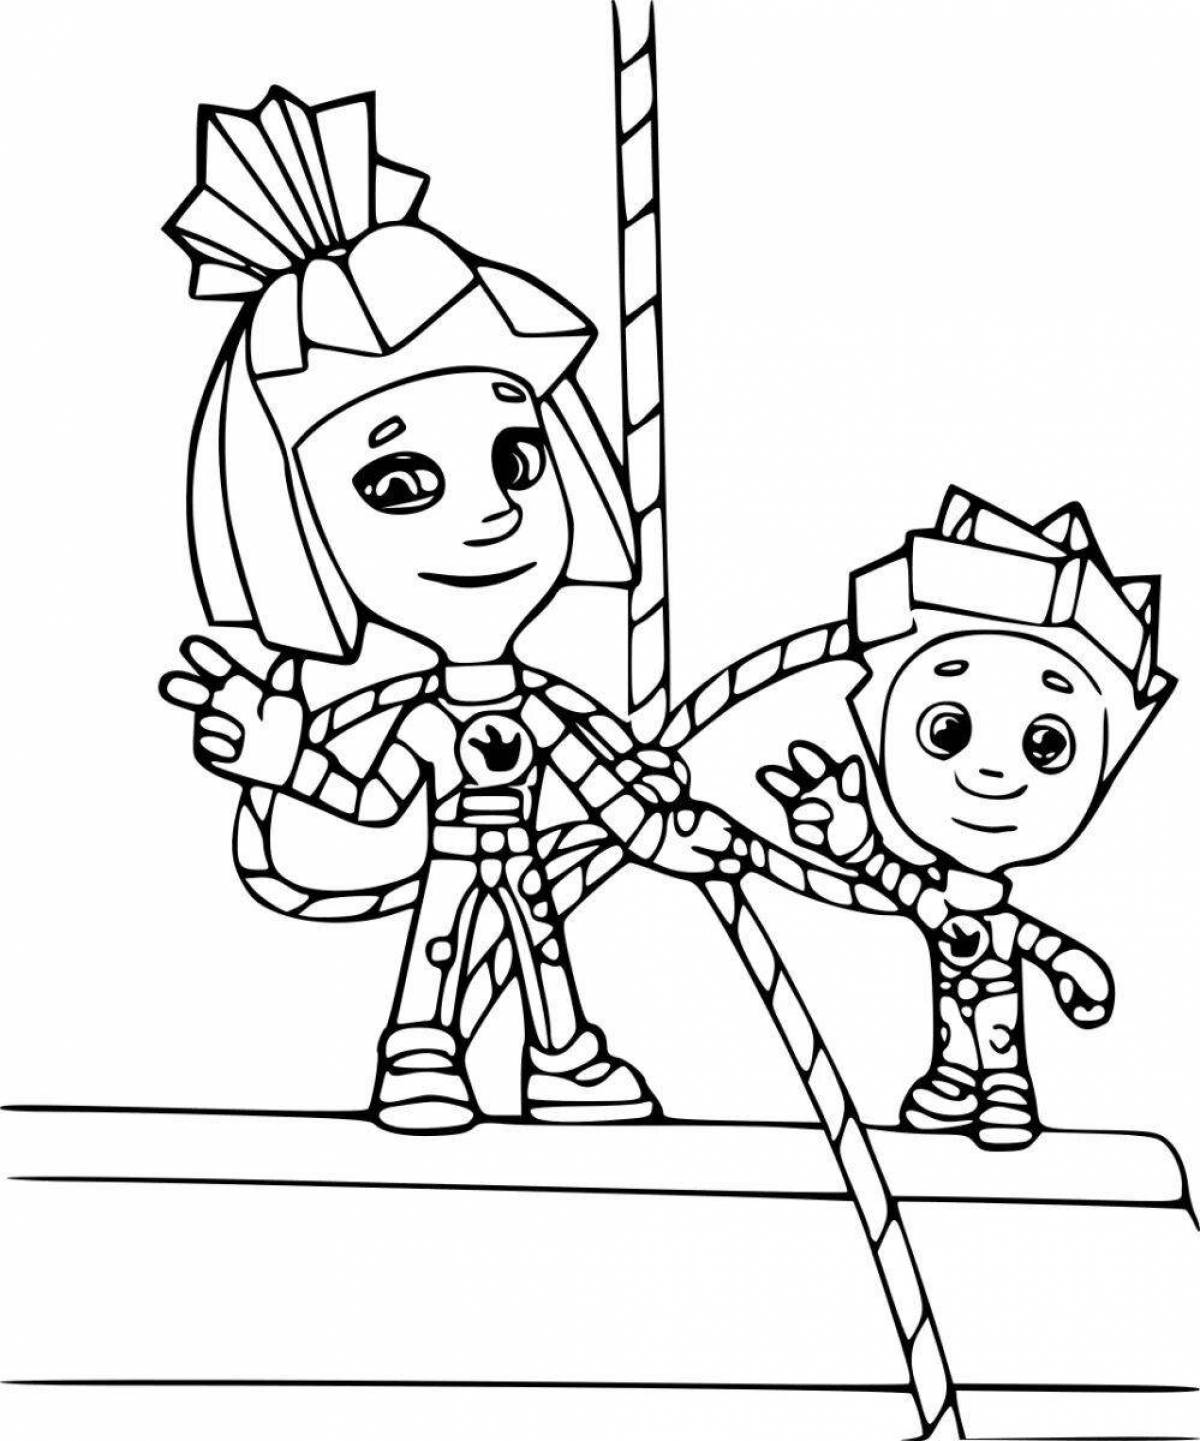 Bright fixies coloring pages for boys